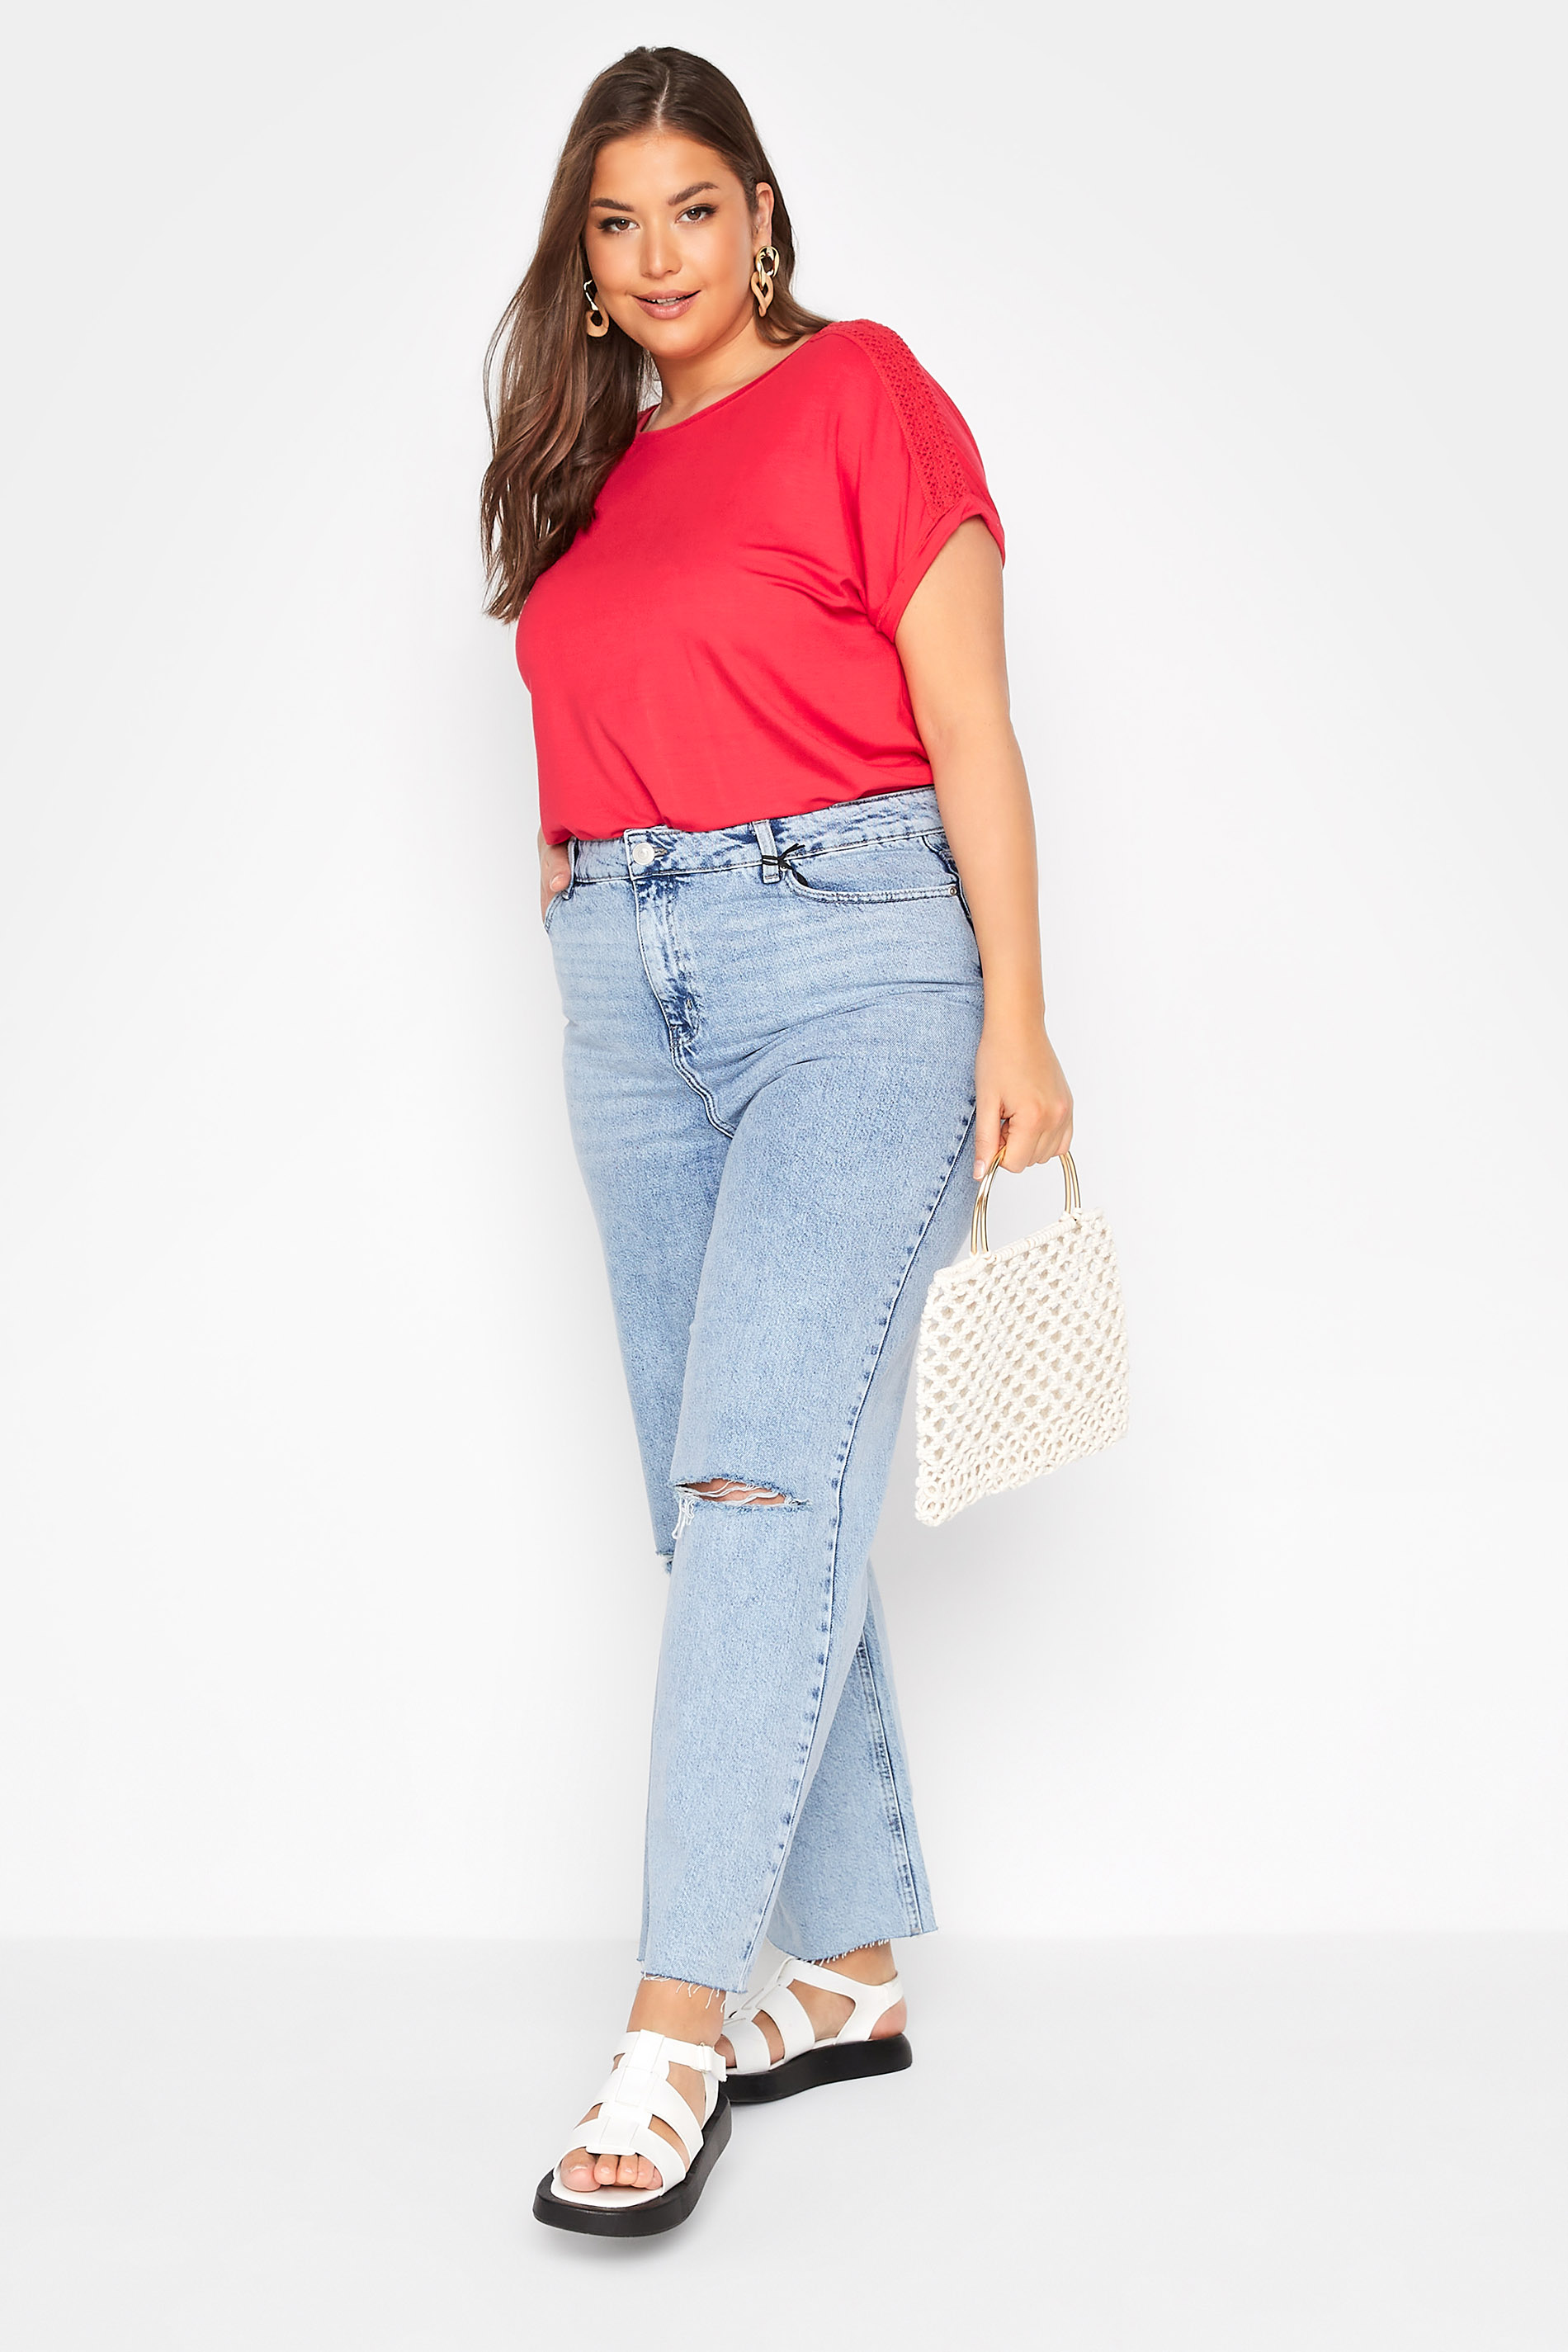 Grande taille  Tops Grande taille  T-Shirts | T-Shirt Rouge en Jersey - DW34983